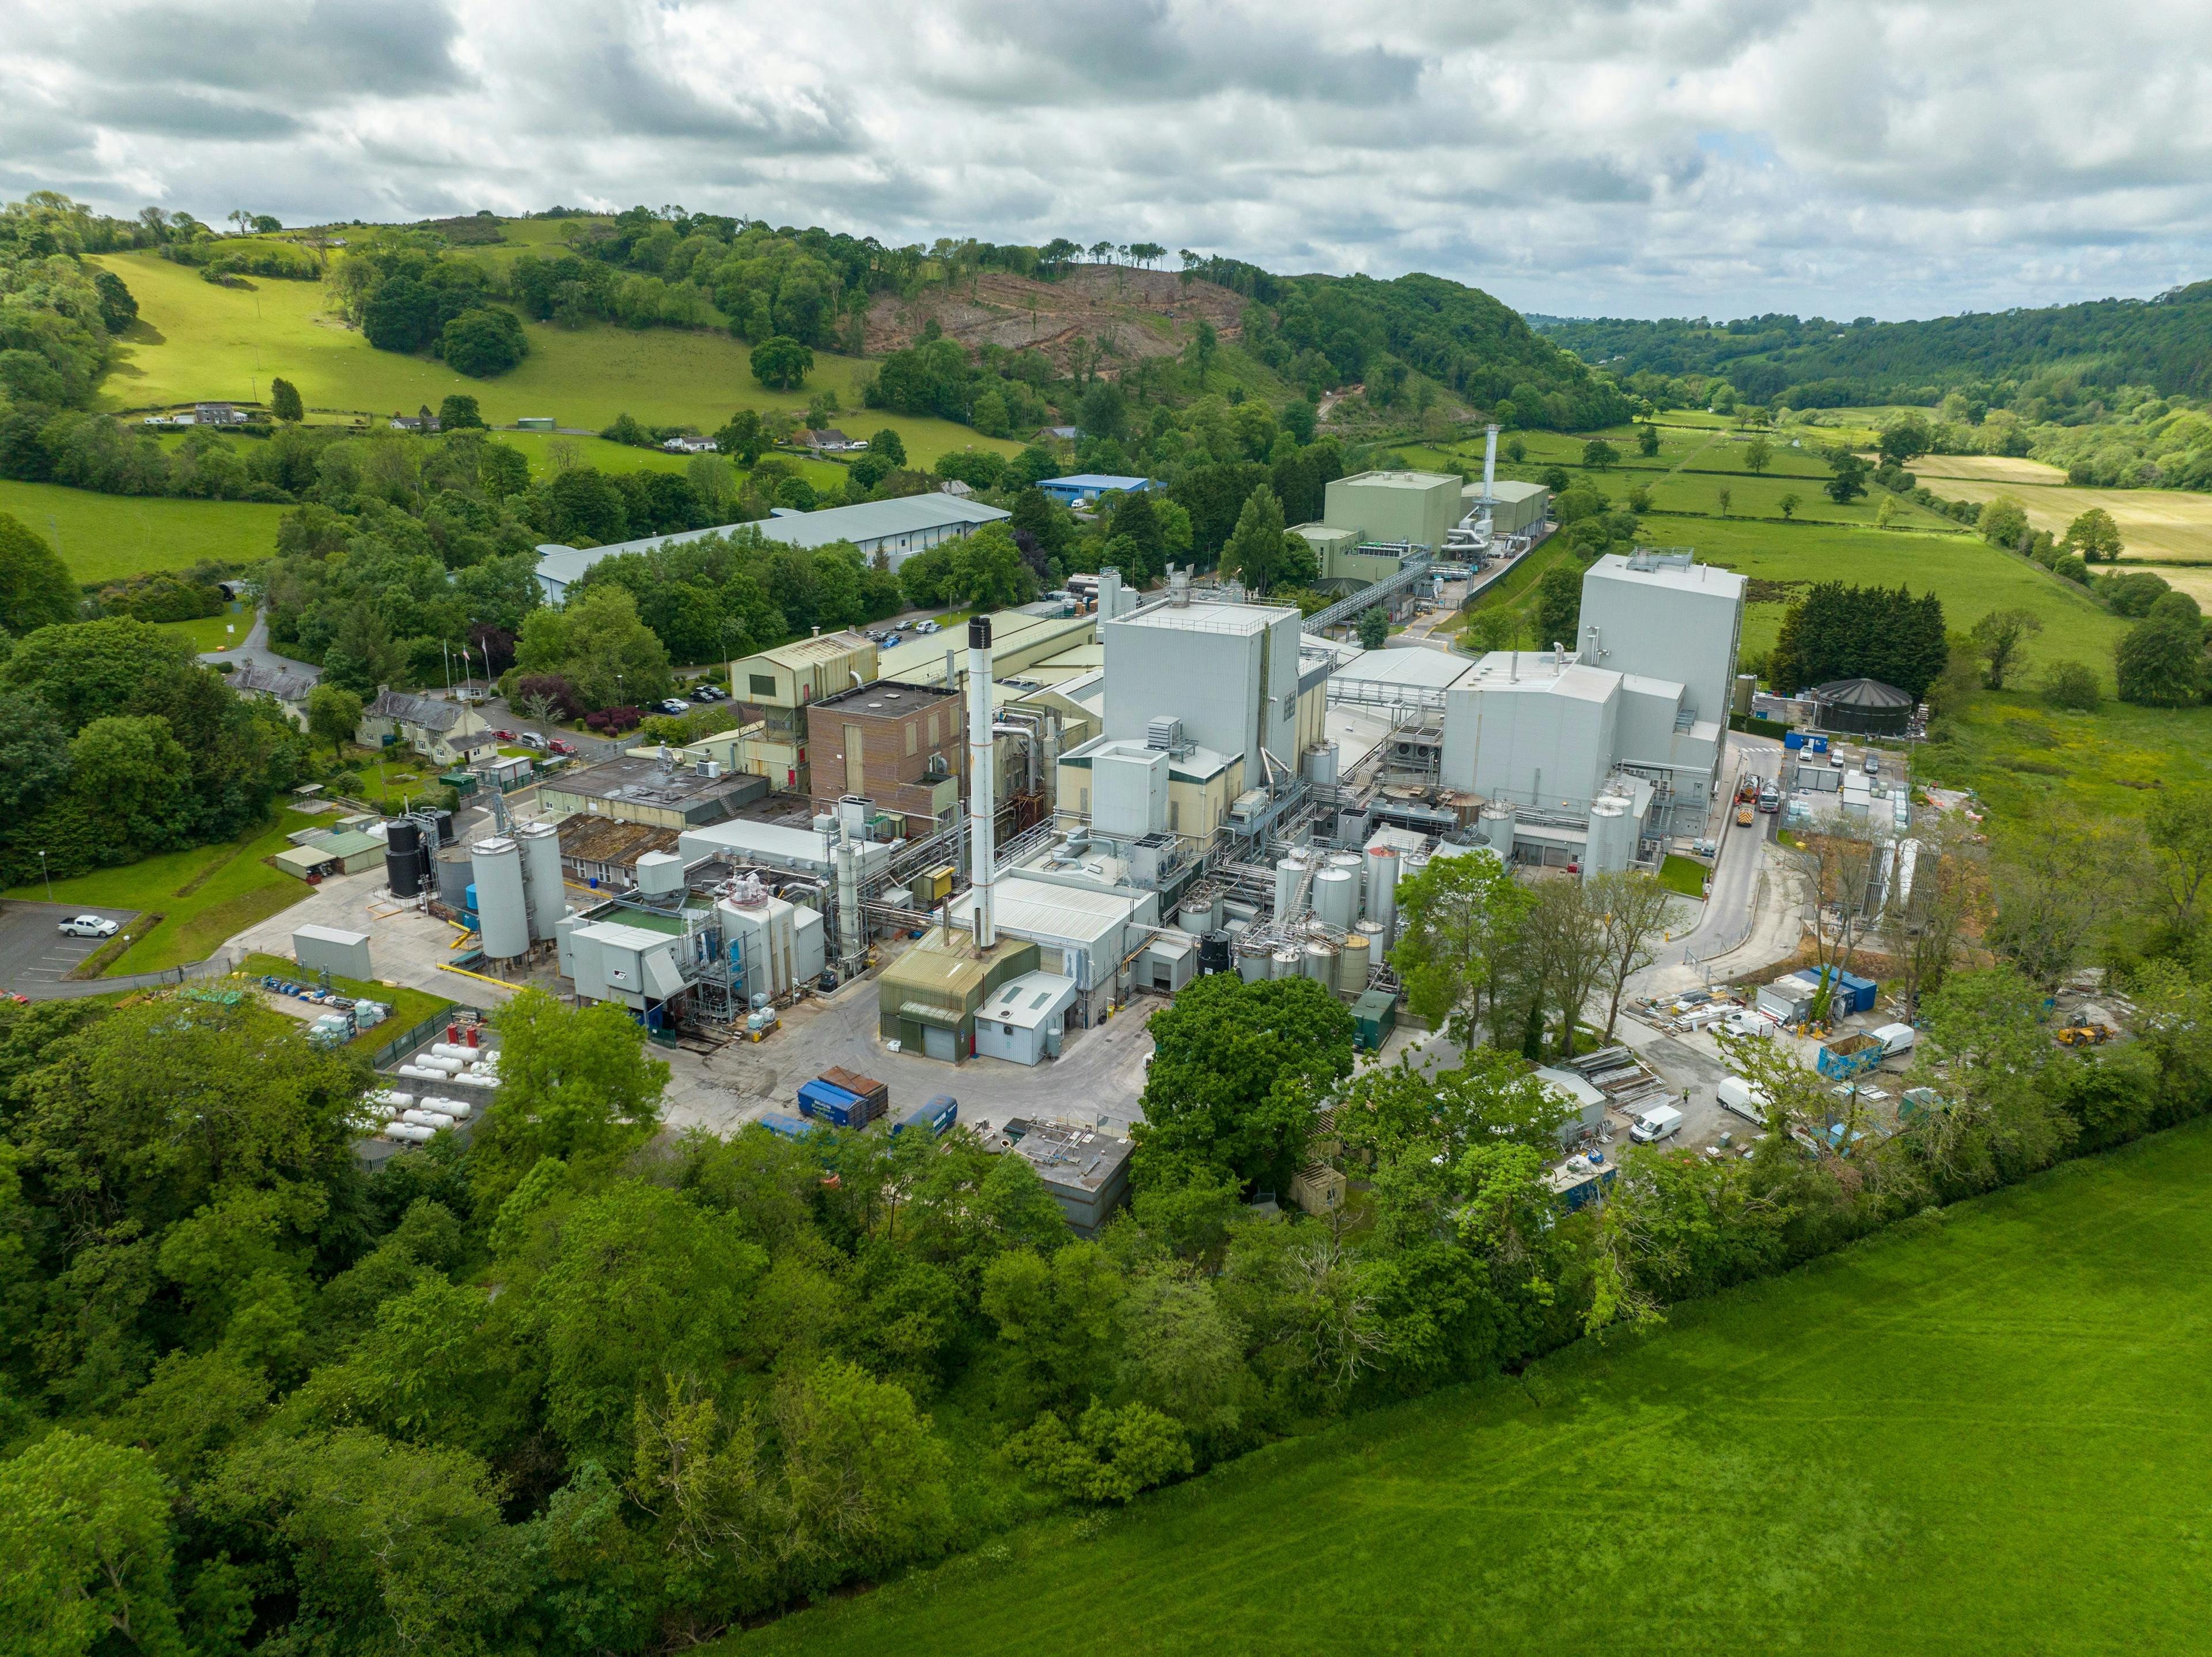 drone shot of Volac whey facility in Wales